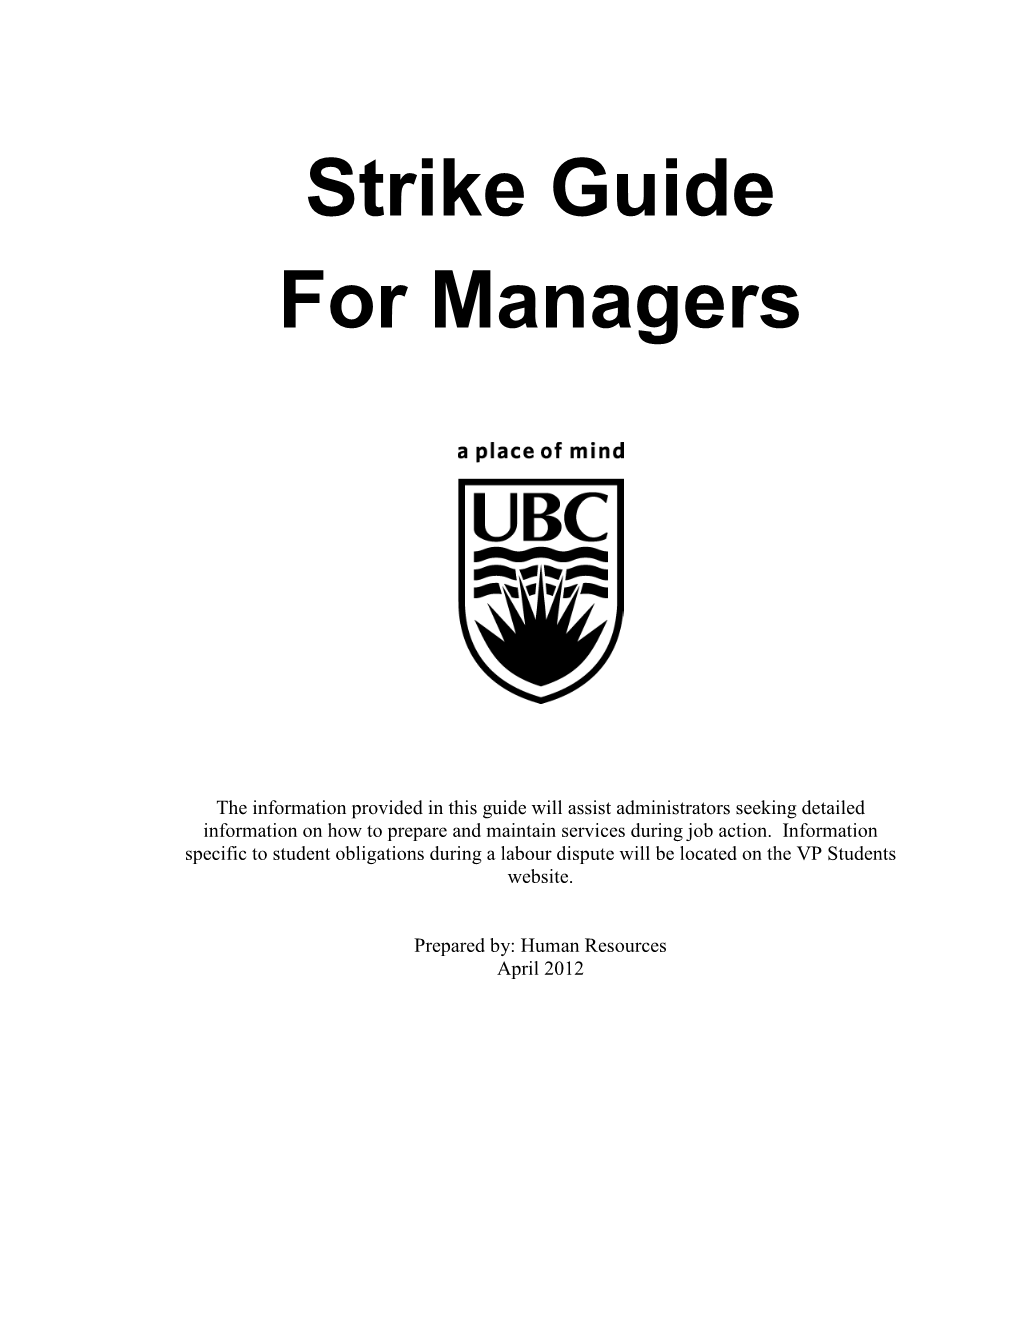 Strike Guide for Managers